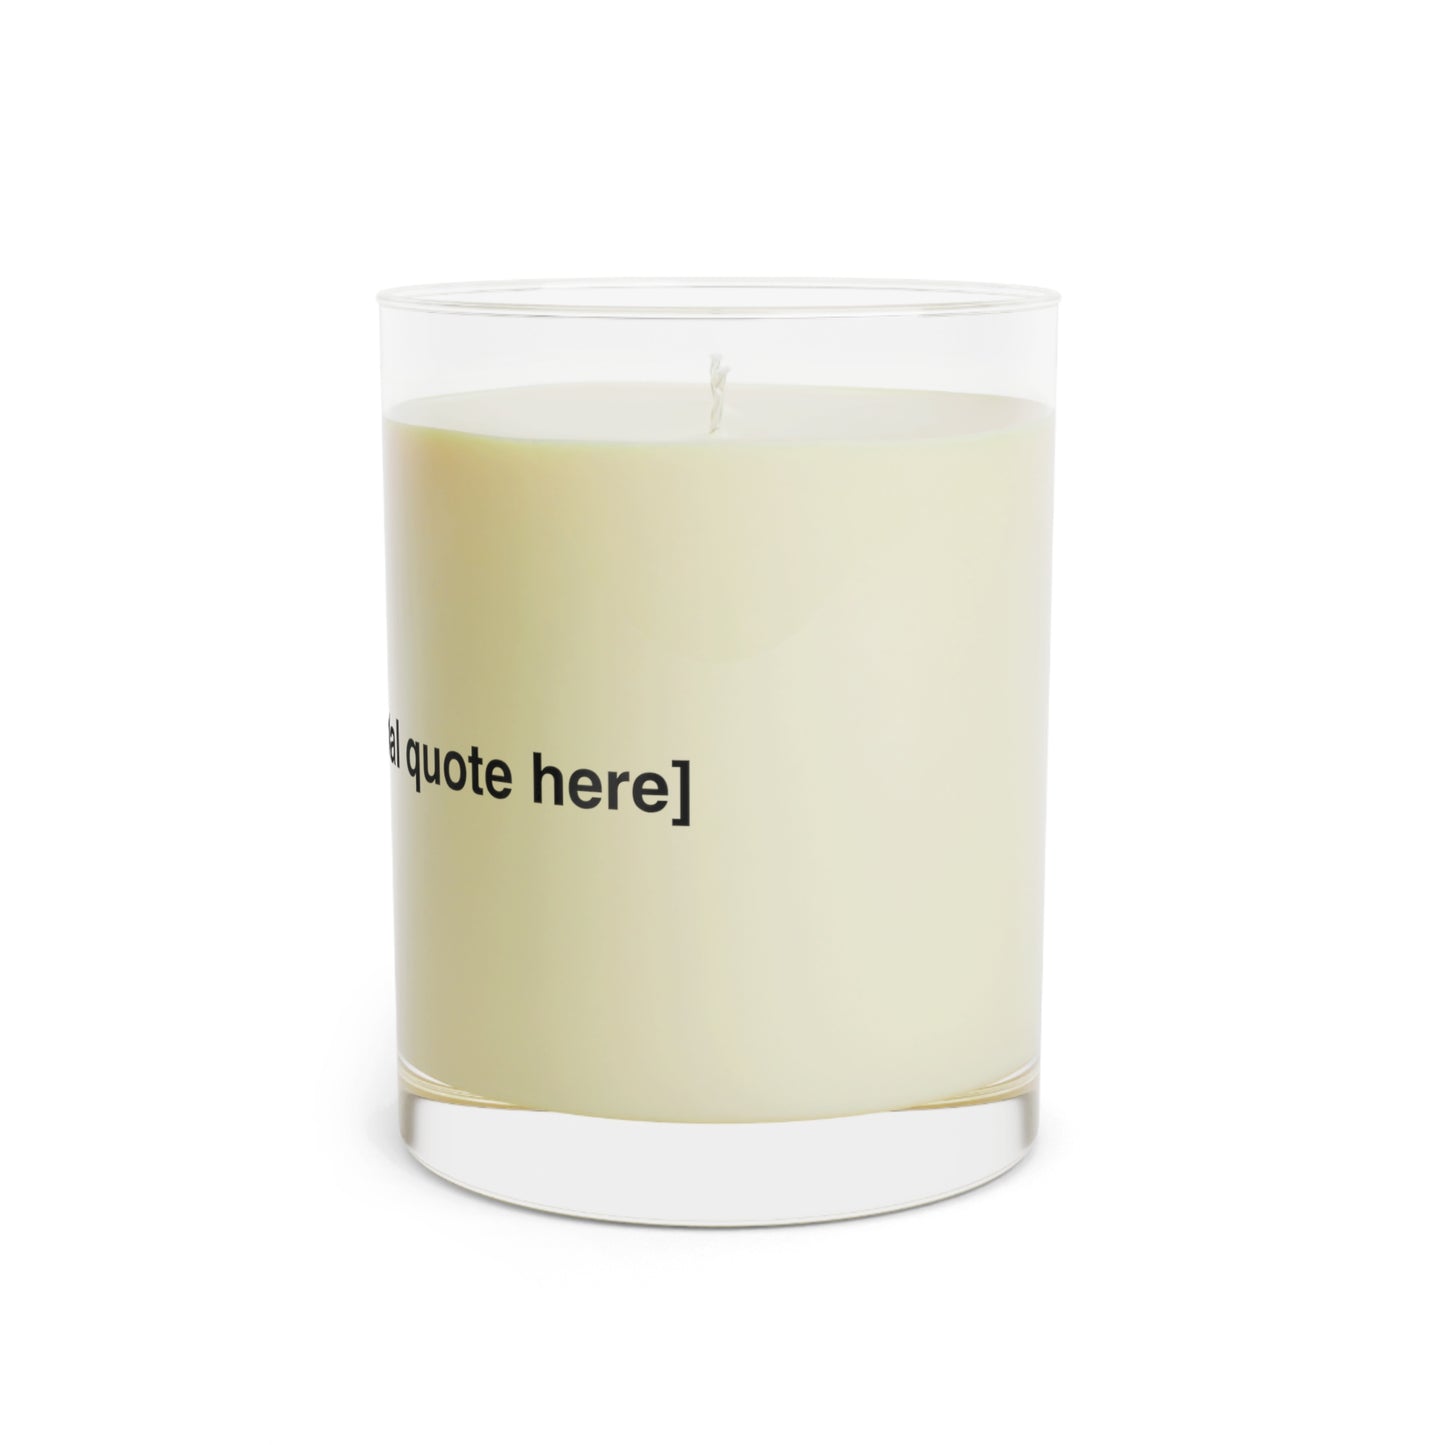 "Motivational" Scented Candle - Full Glass, 11oz